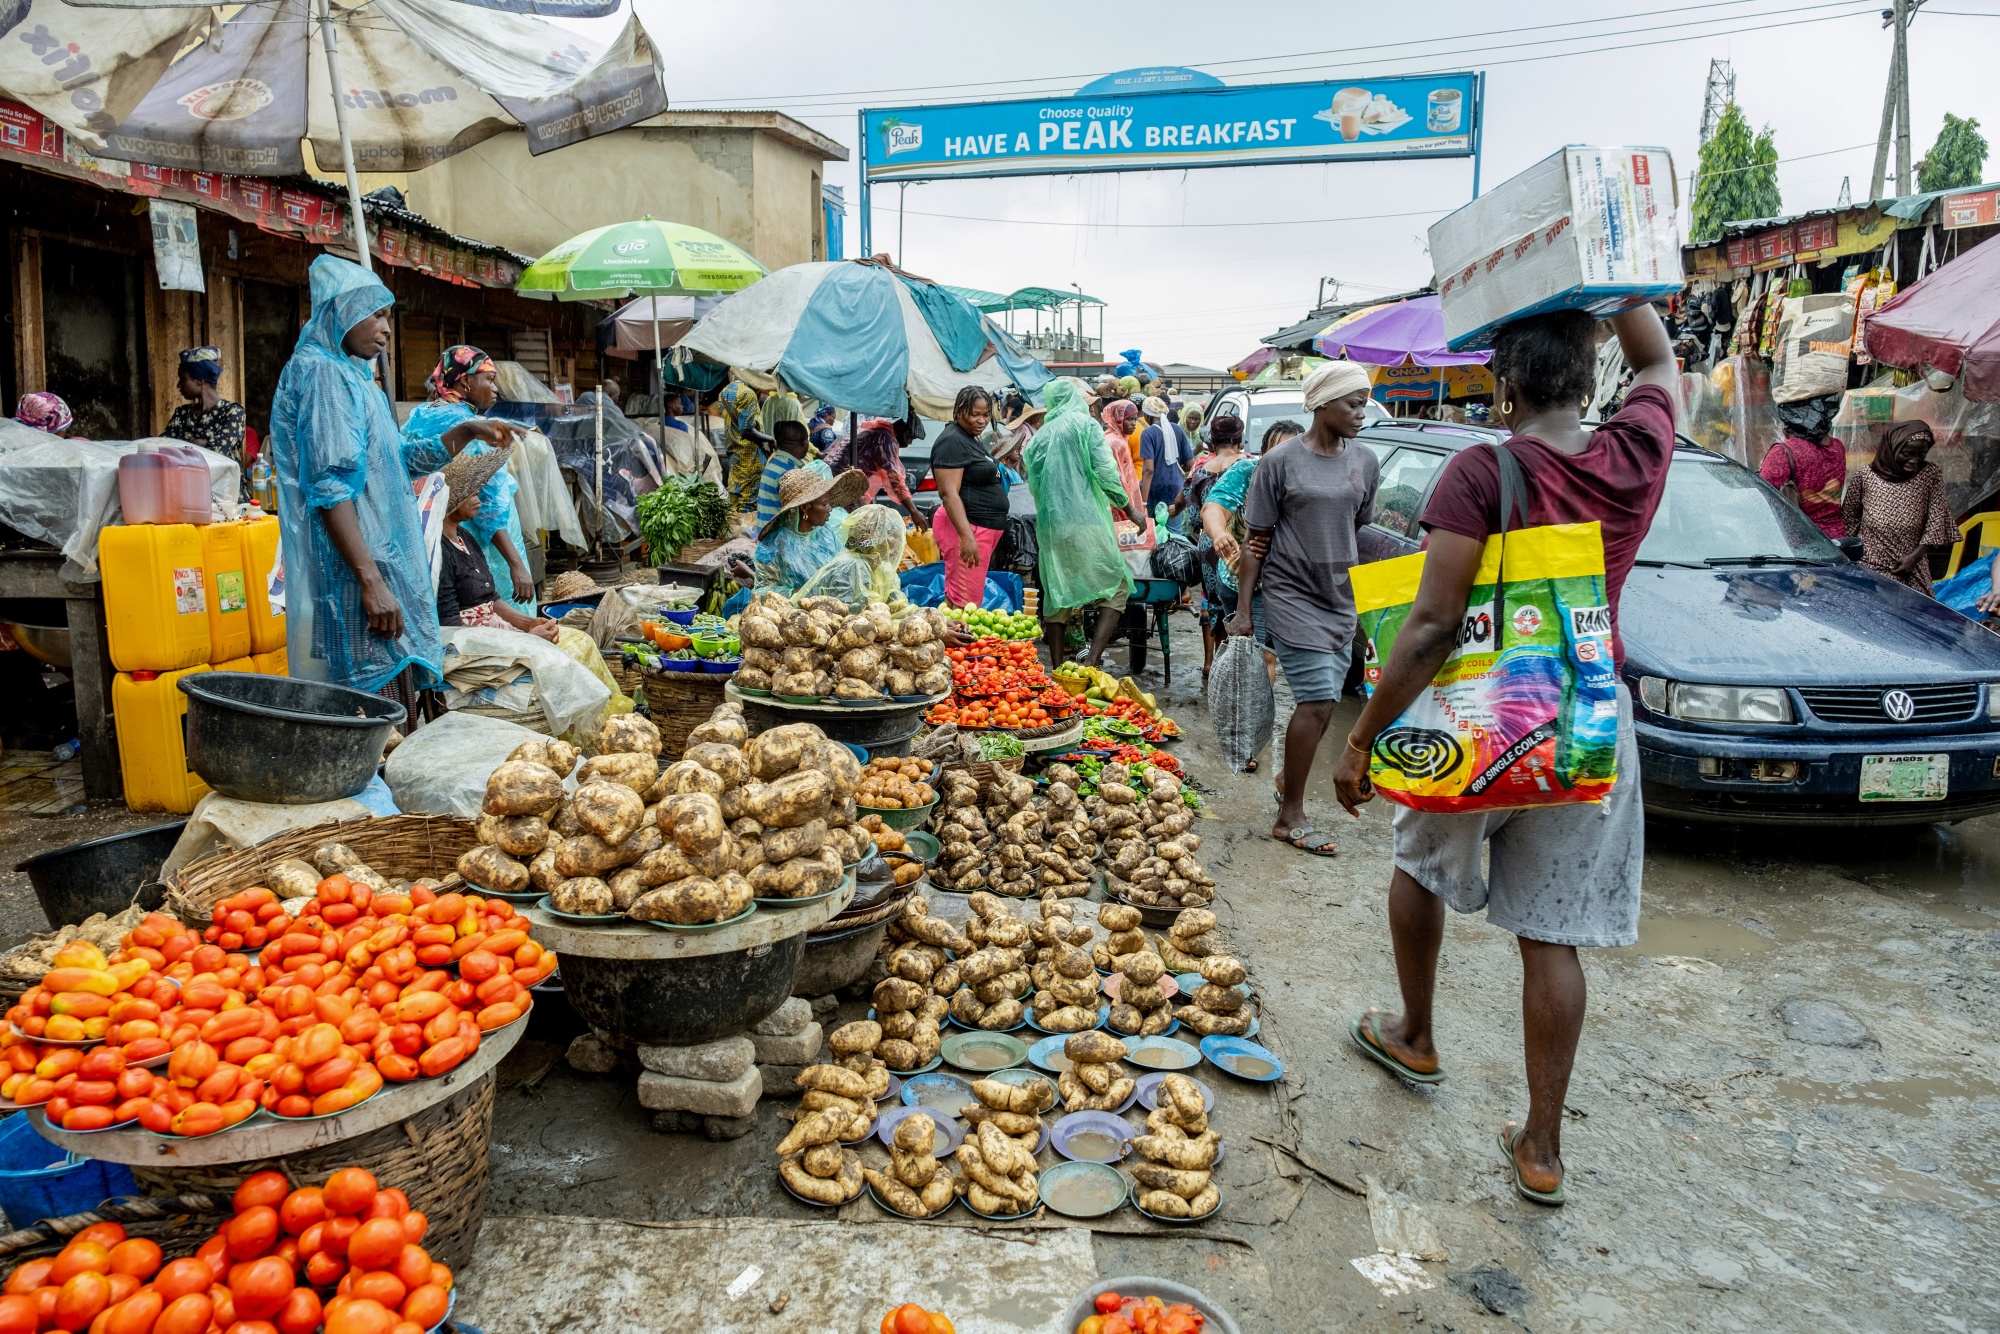 Vendors sell fresh produce at a food market in Lagos, Nigeria.